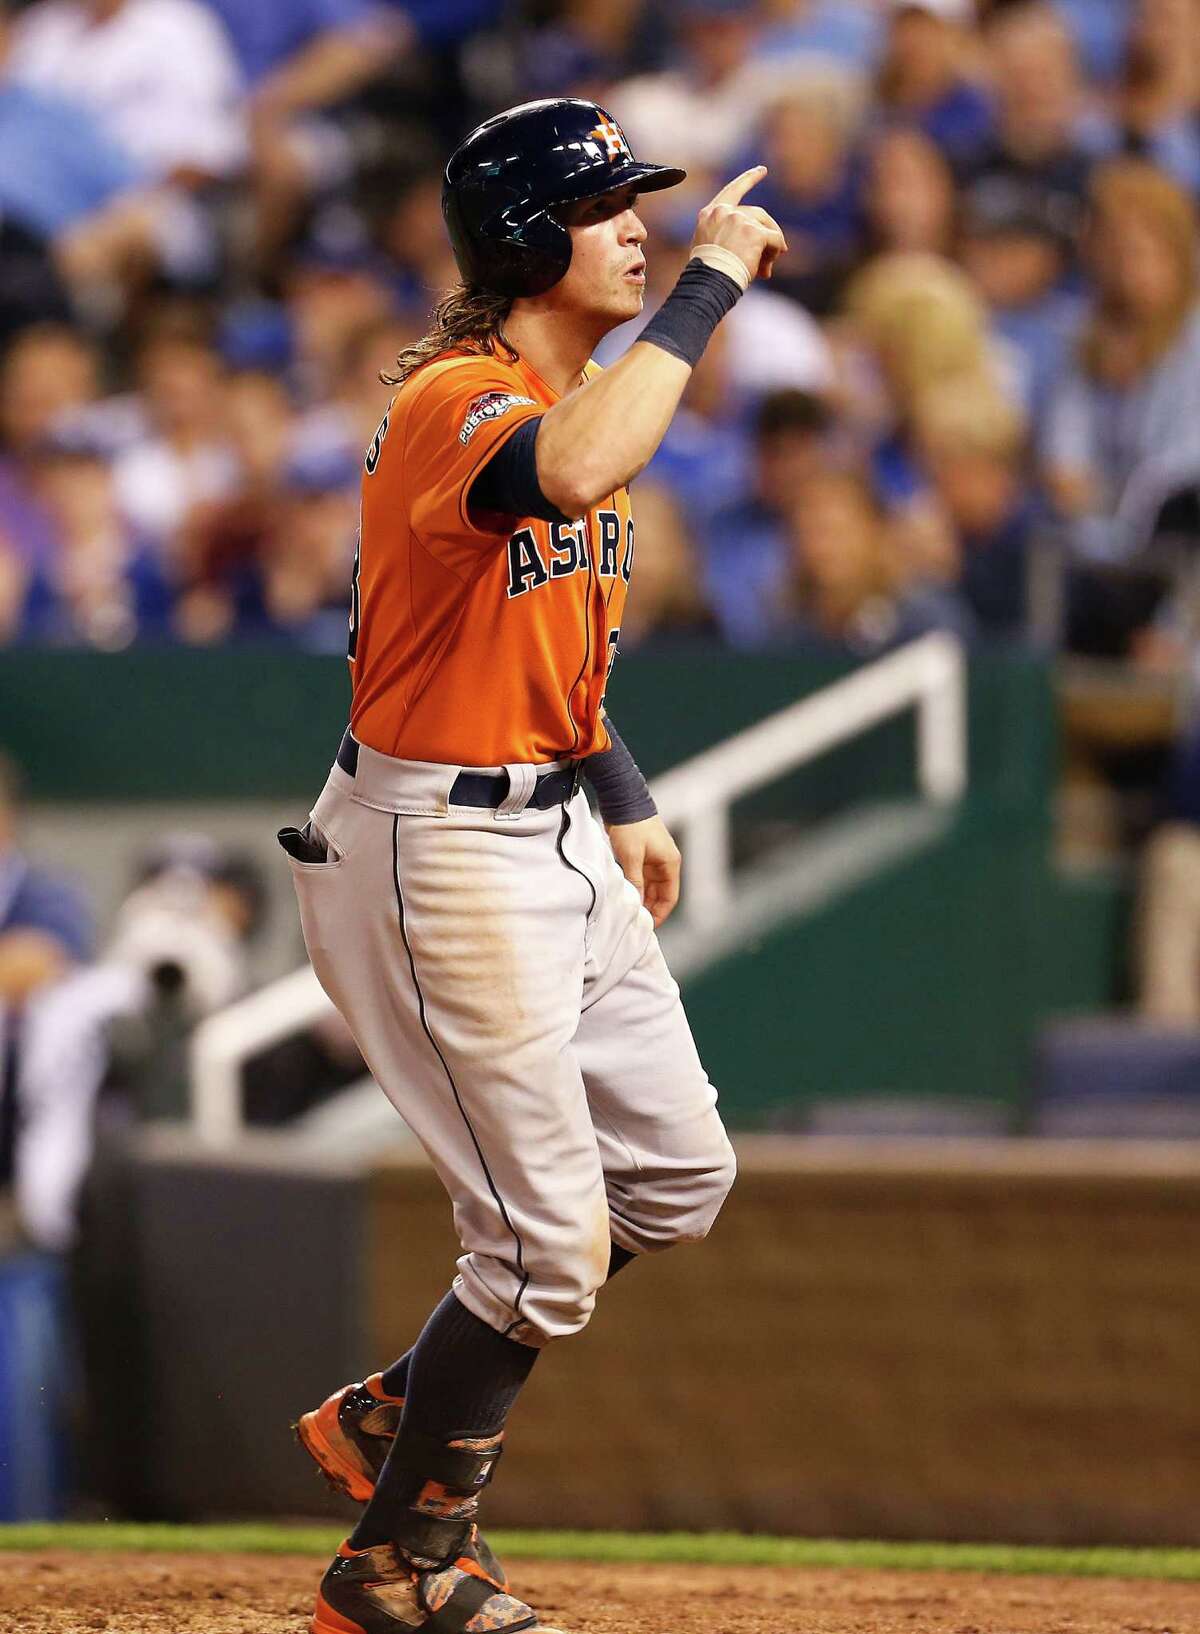 Houston Astros left fielder Colby Rasmus celebrates after hitting a solo home run in the top of the eighth inning. Game 1 of the American League Division Series at Kauffman Stadium on Oct. 8, 2015, in Kansas City.